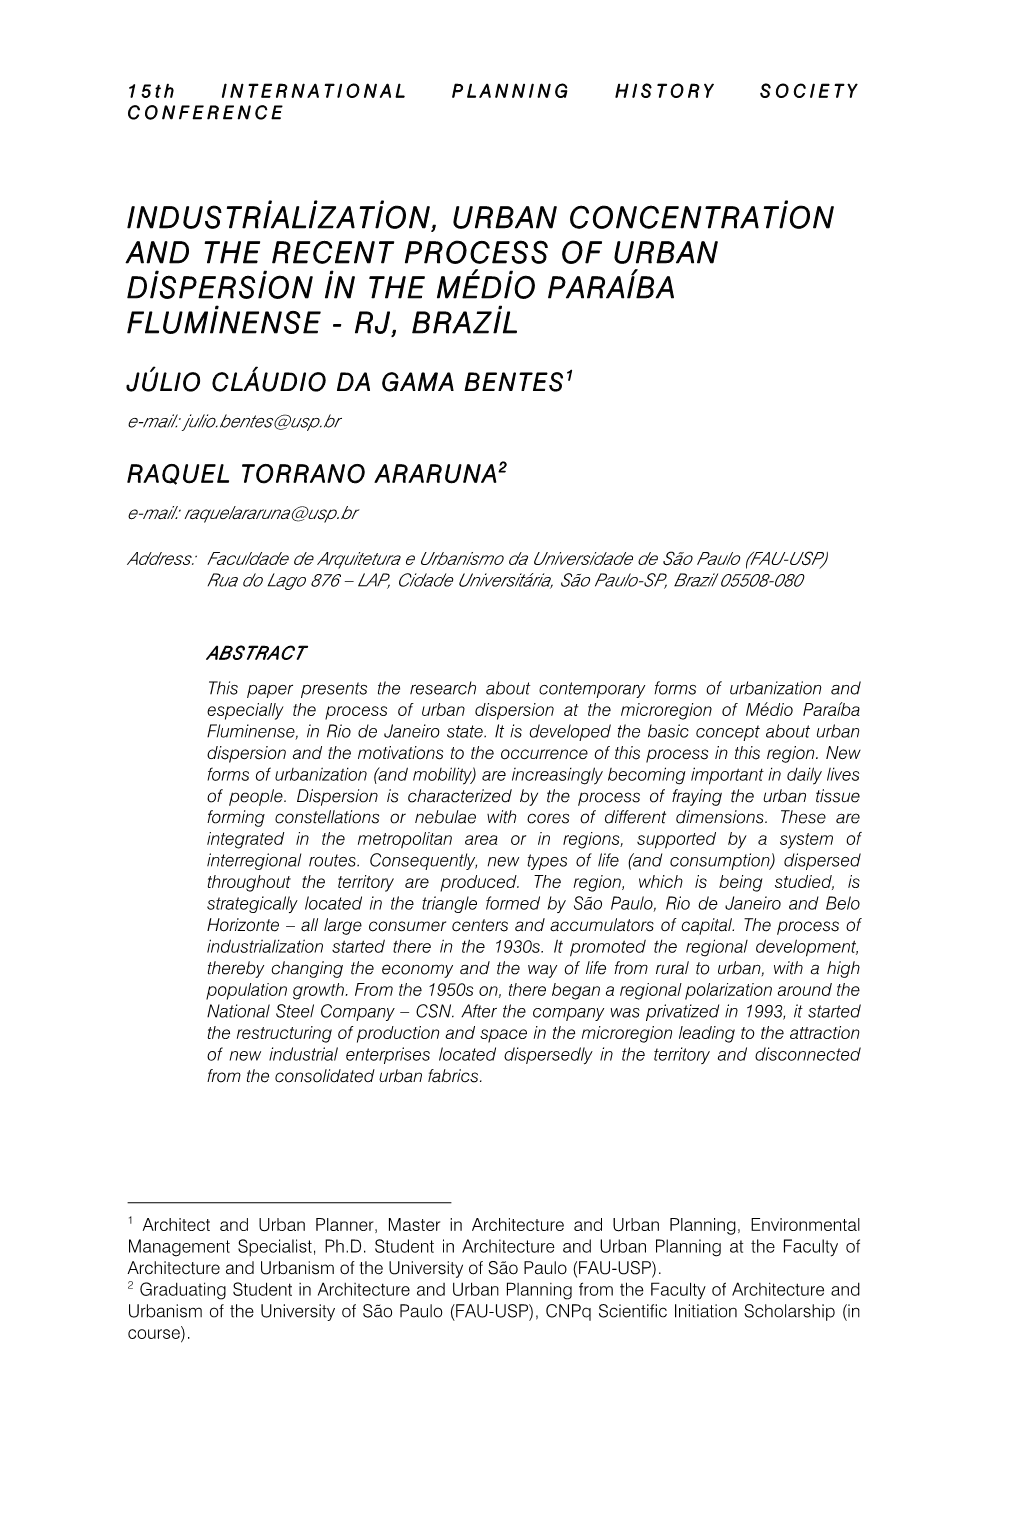 Industrialization, Urban Concentration and the Recent Process of Urban Dispersion in the Médio Paraíba Fluminense - Rj, Brazil